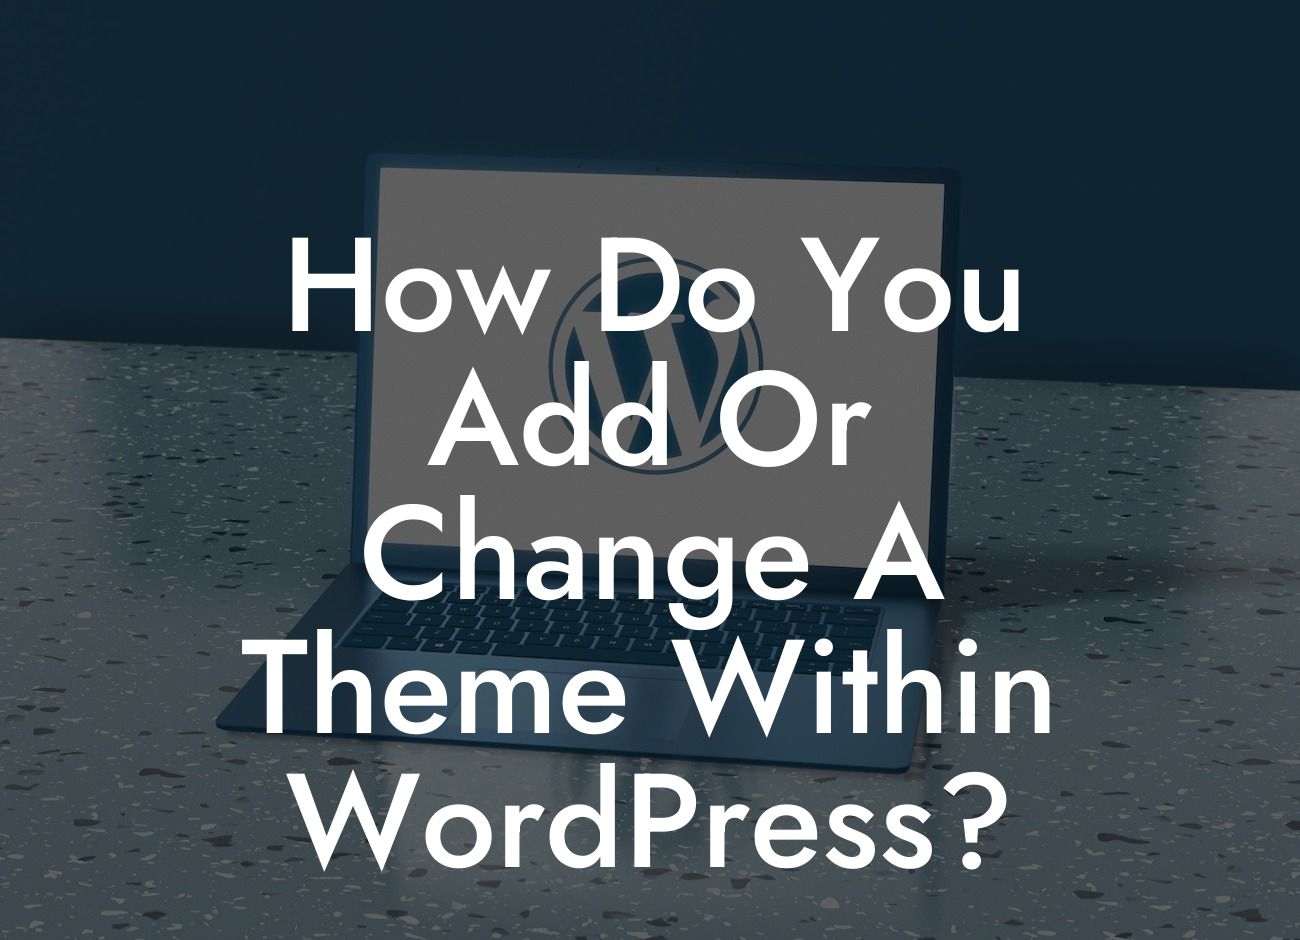 How Do You Add Or Change A Theme Within WordPress?